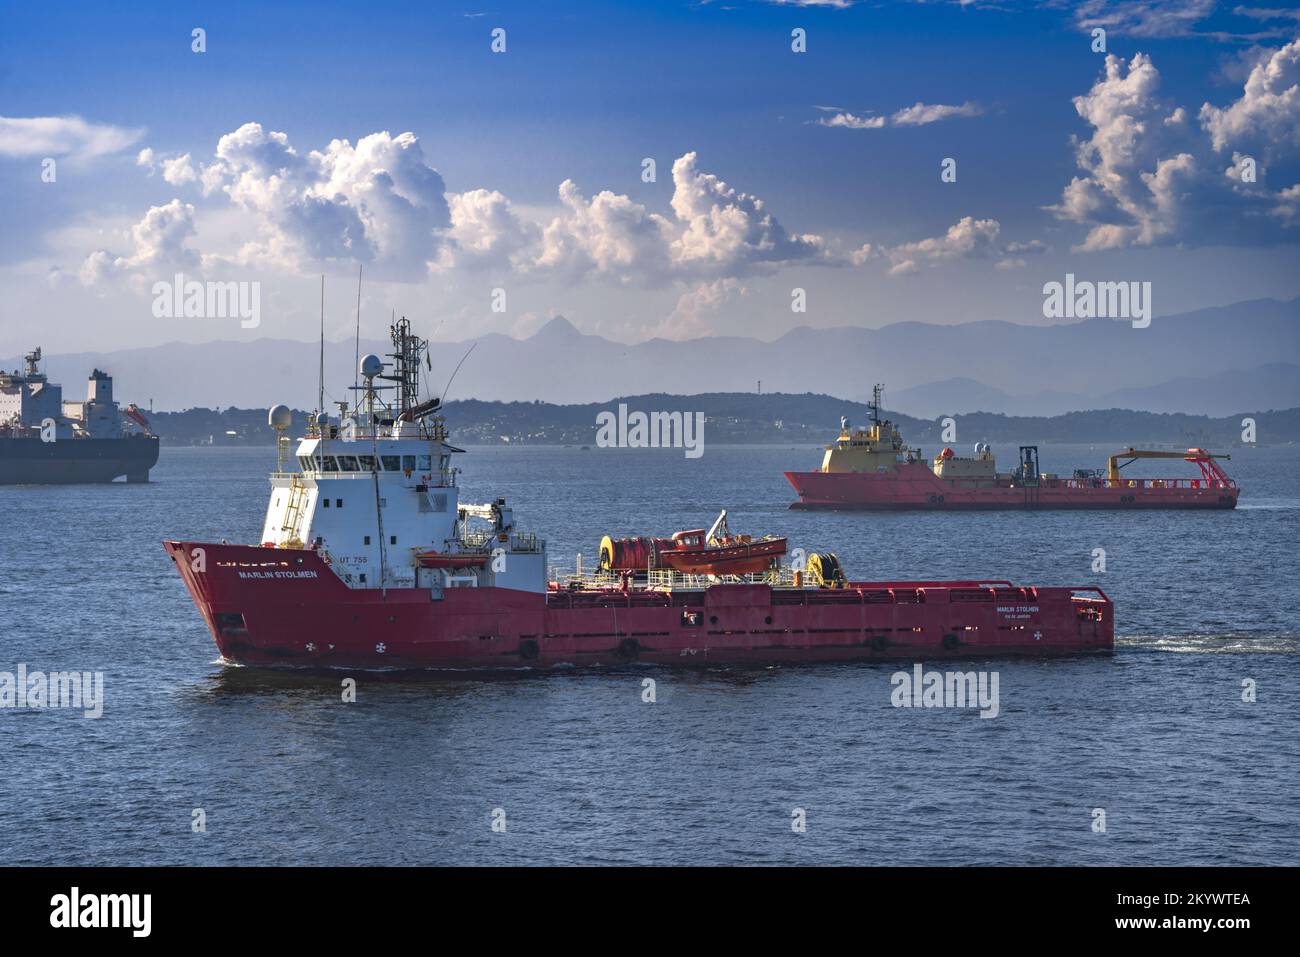 Vessels at anchorage in Guanabara Bay, Rio de Janeiro. There are different kinds of vessels at this anchorage, most working for the off shore industry. Stock Photo